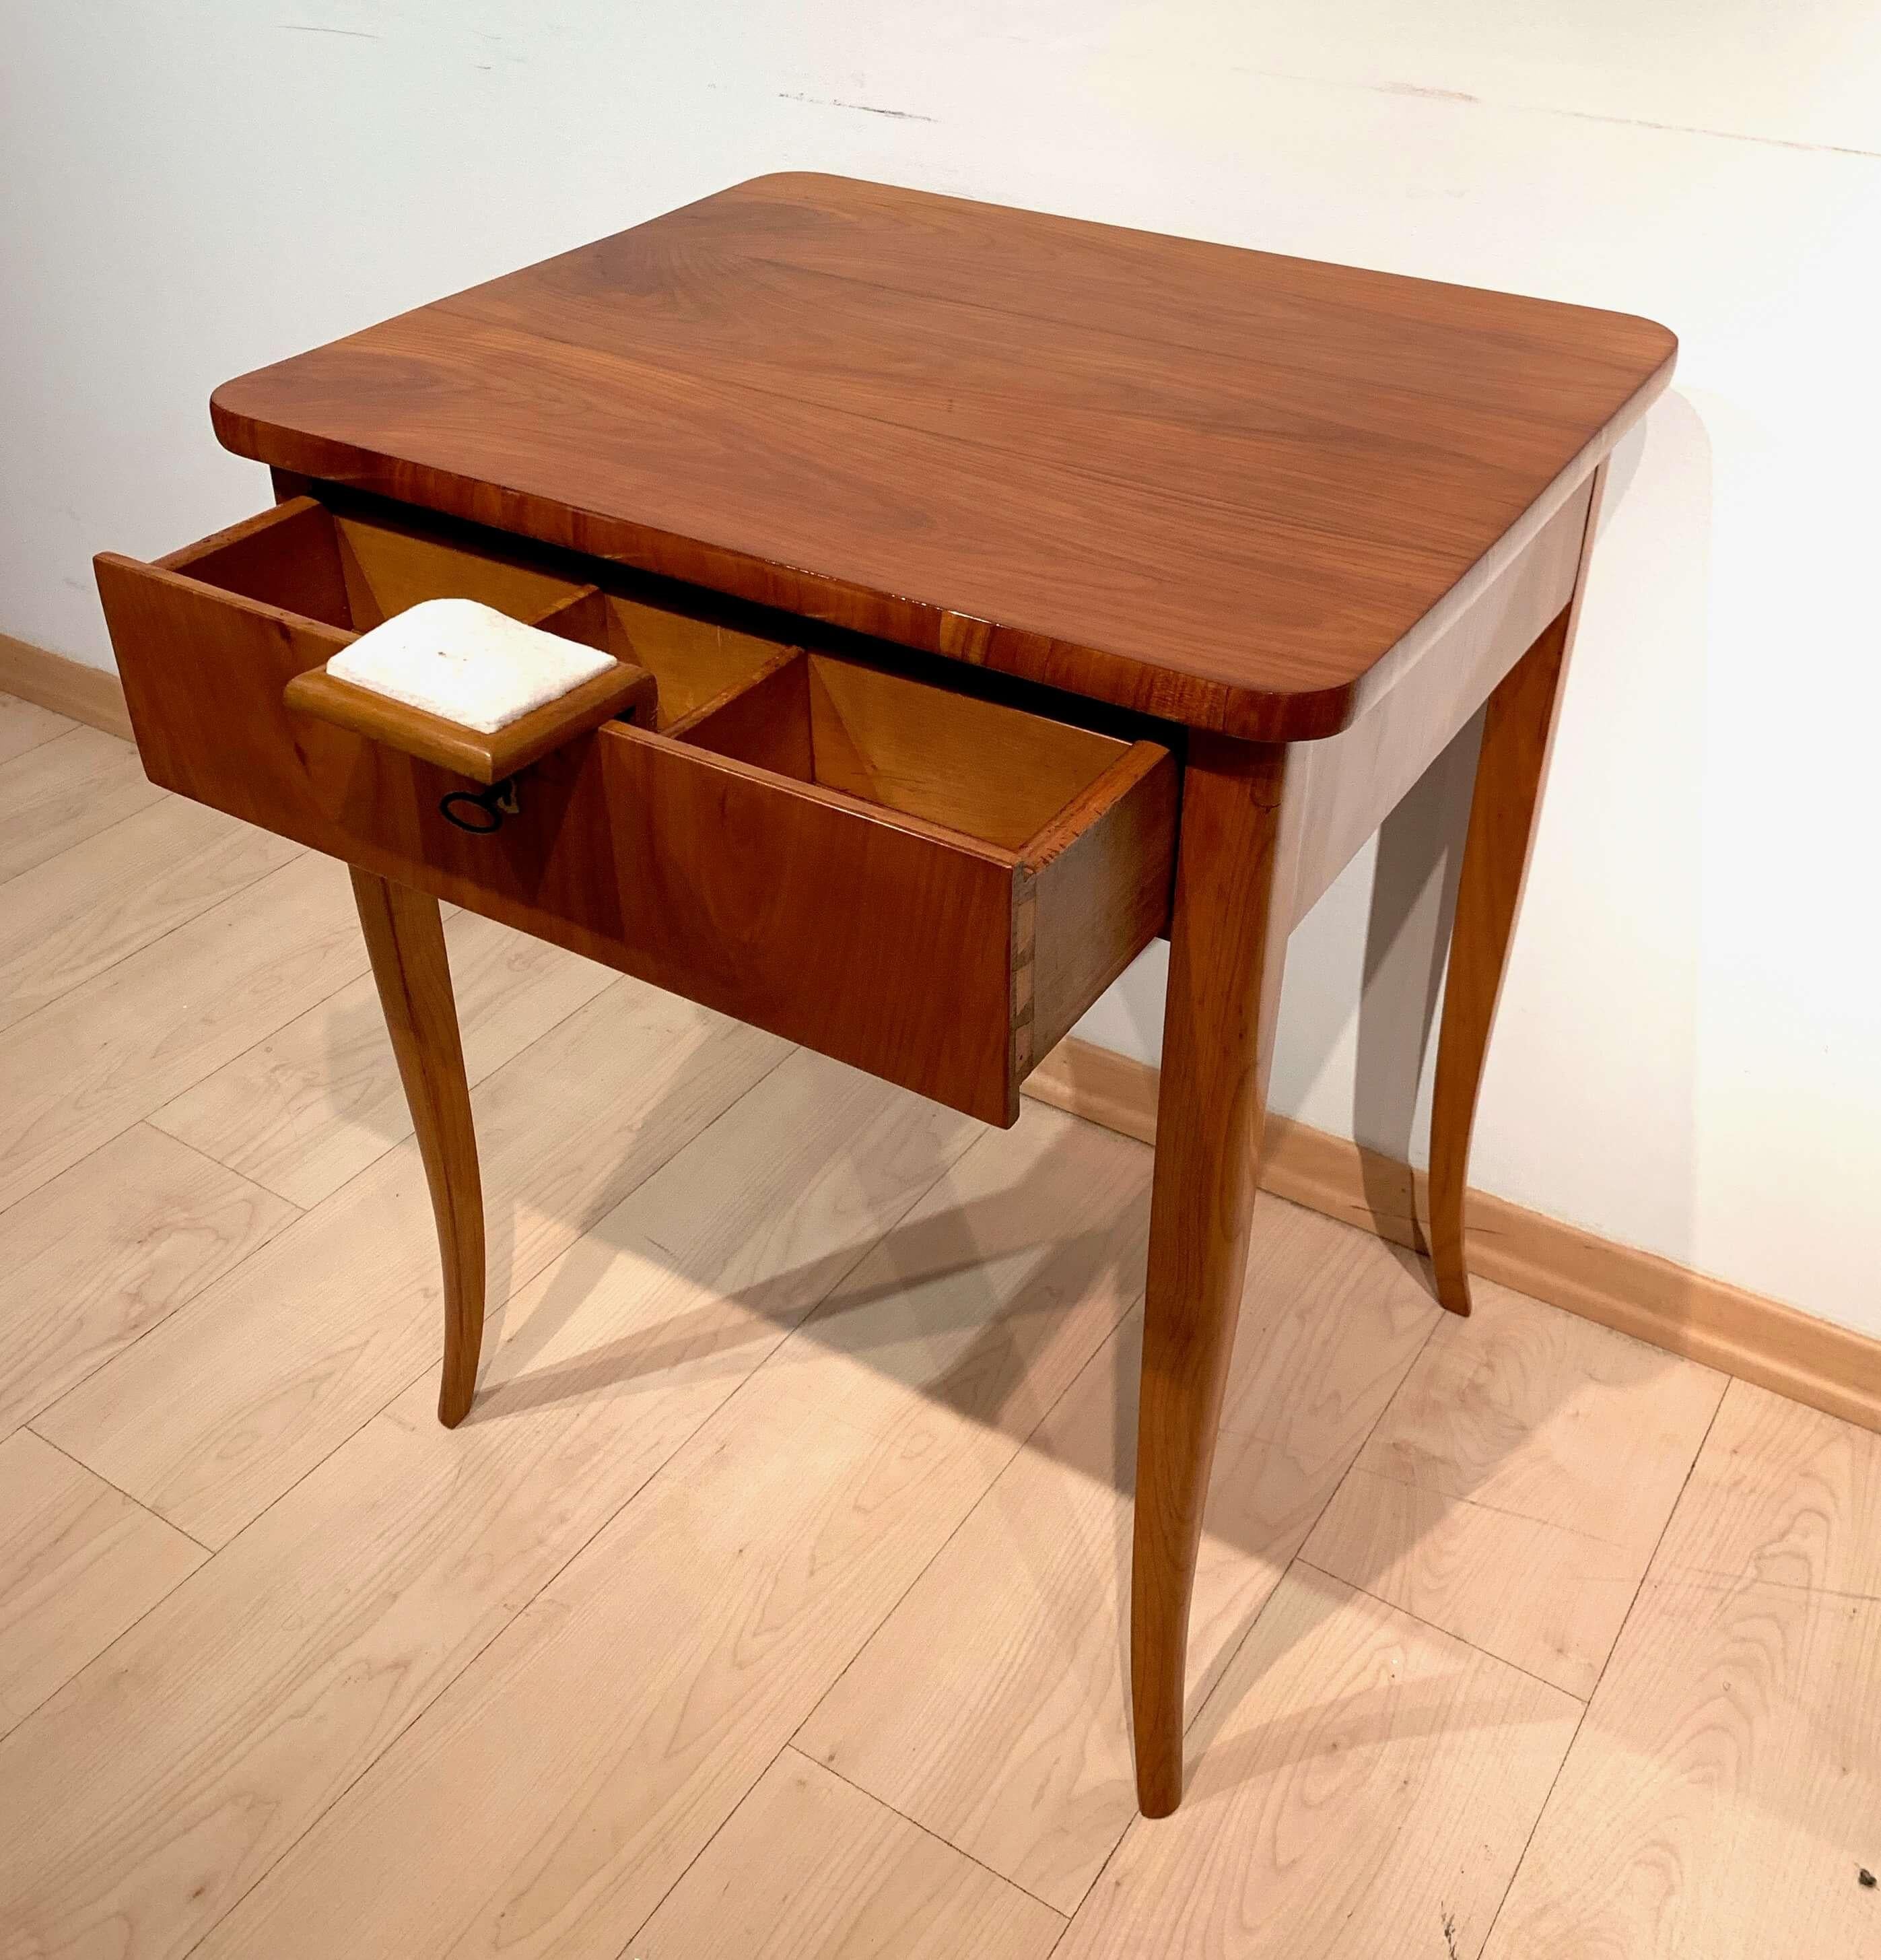 Classic cherry wood Biedermeier sewing table from Austria about 1925/30.

Cherry veneered (plate and apron) and solid wood (legs). 
Raised on curved square tapered legs.
One drawer with interior including fold-out sewing cushion. 
Bone (?) inlay